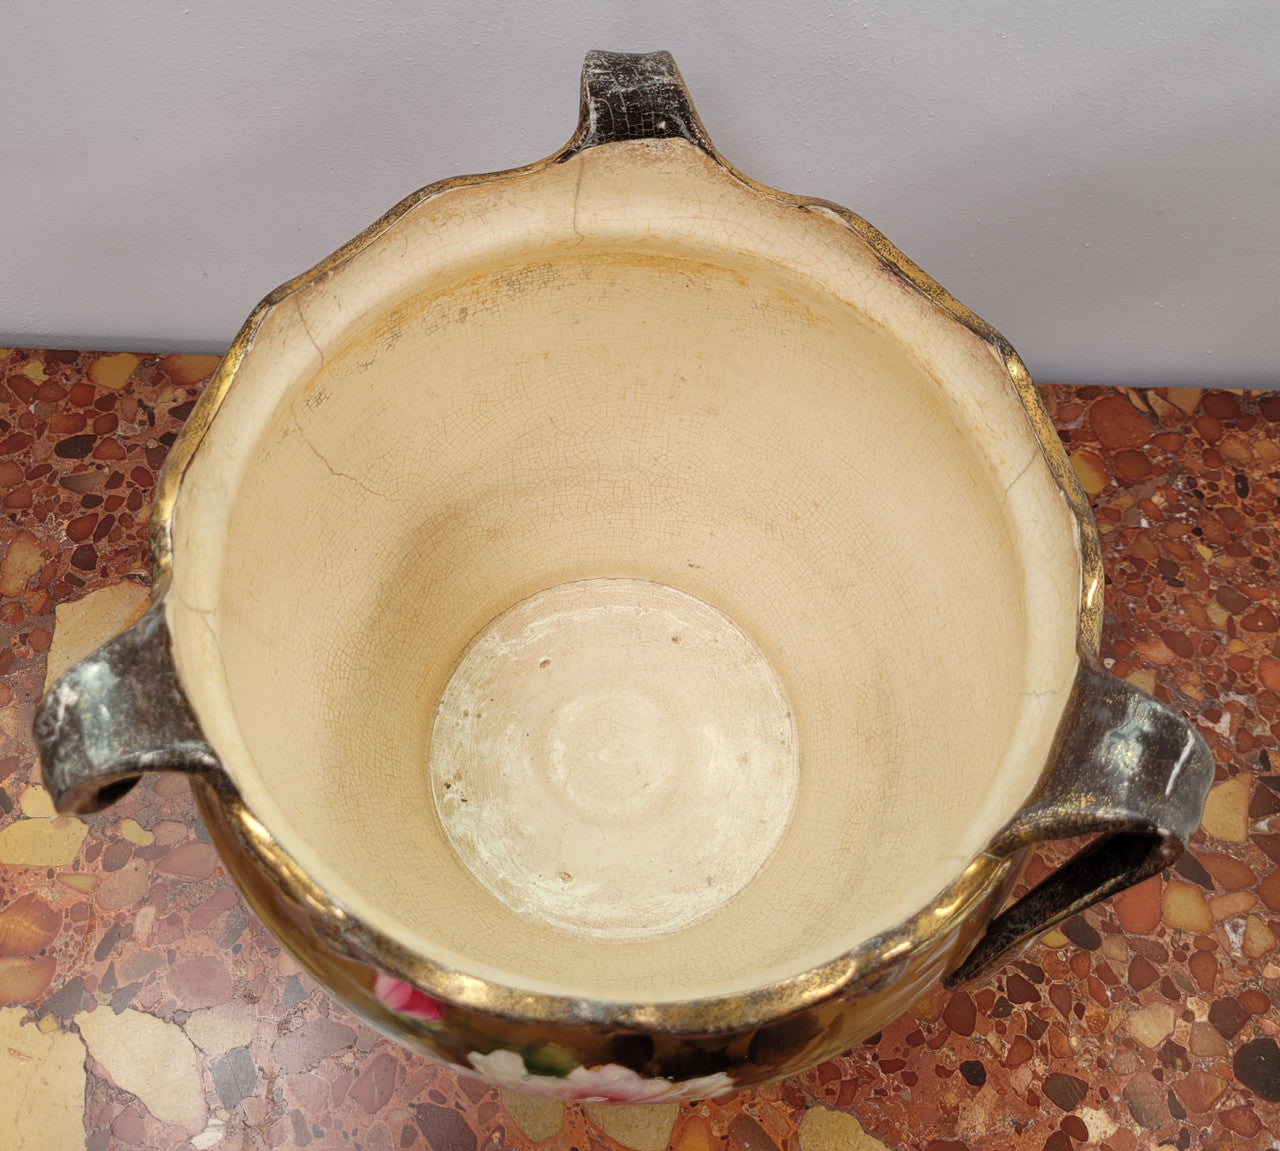 Pretty Antique three handled floral jardinière. Please note that it is being sold in as found condition, please view photos as they help form part of the description.